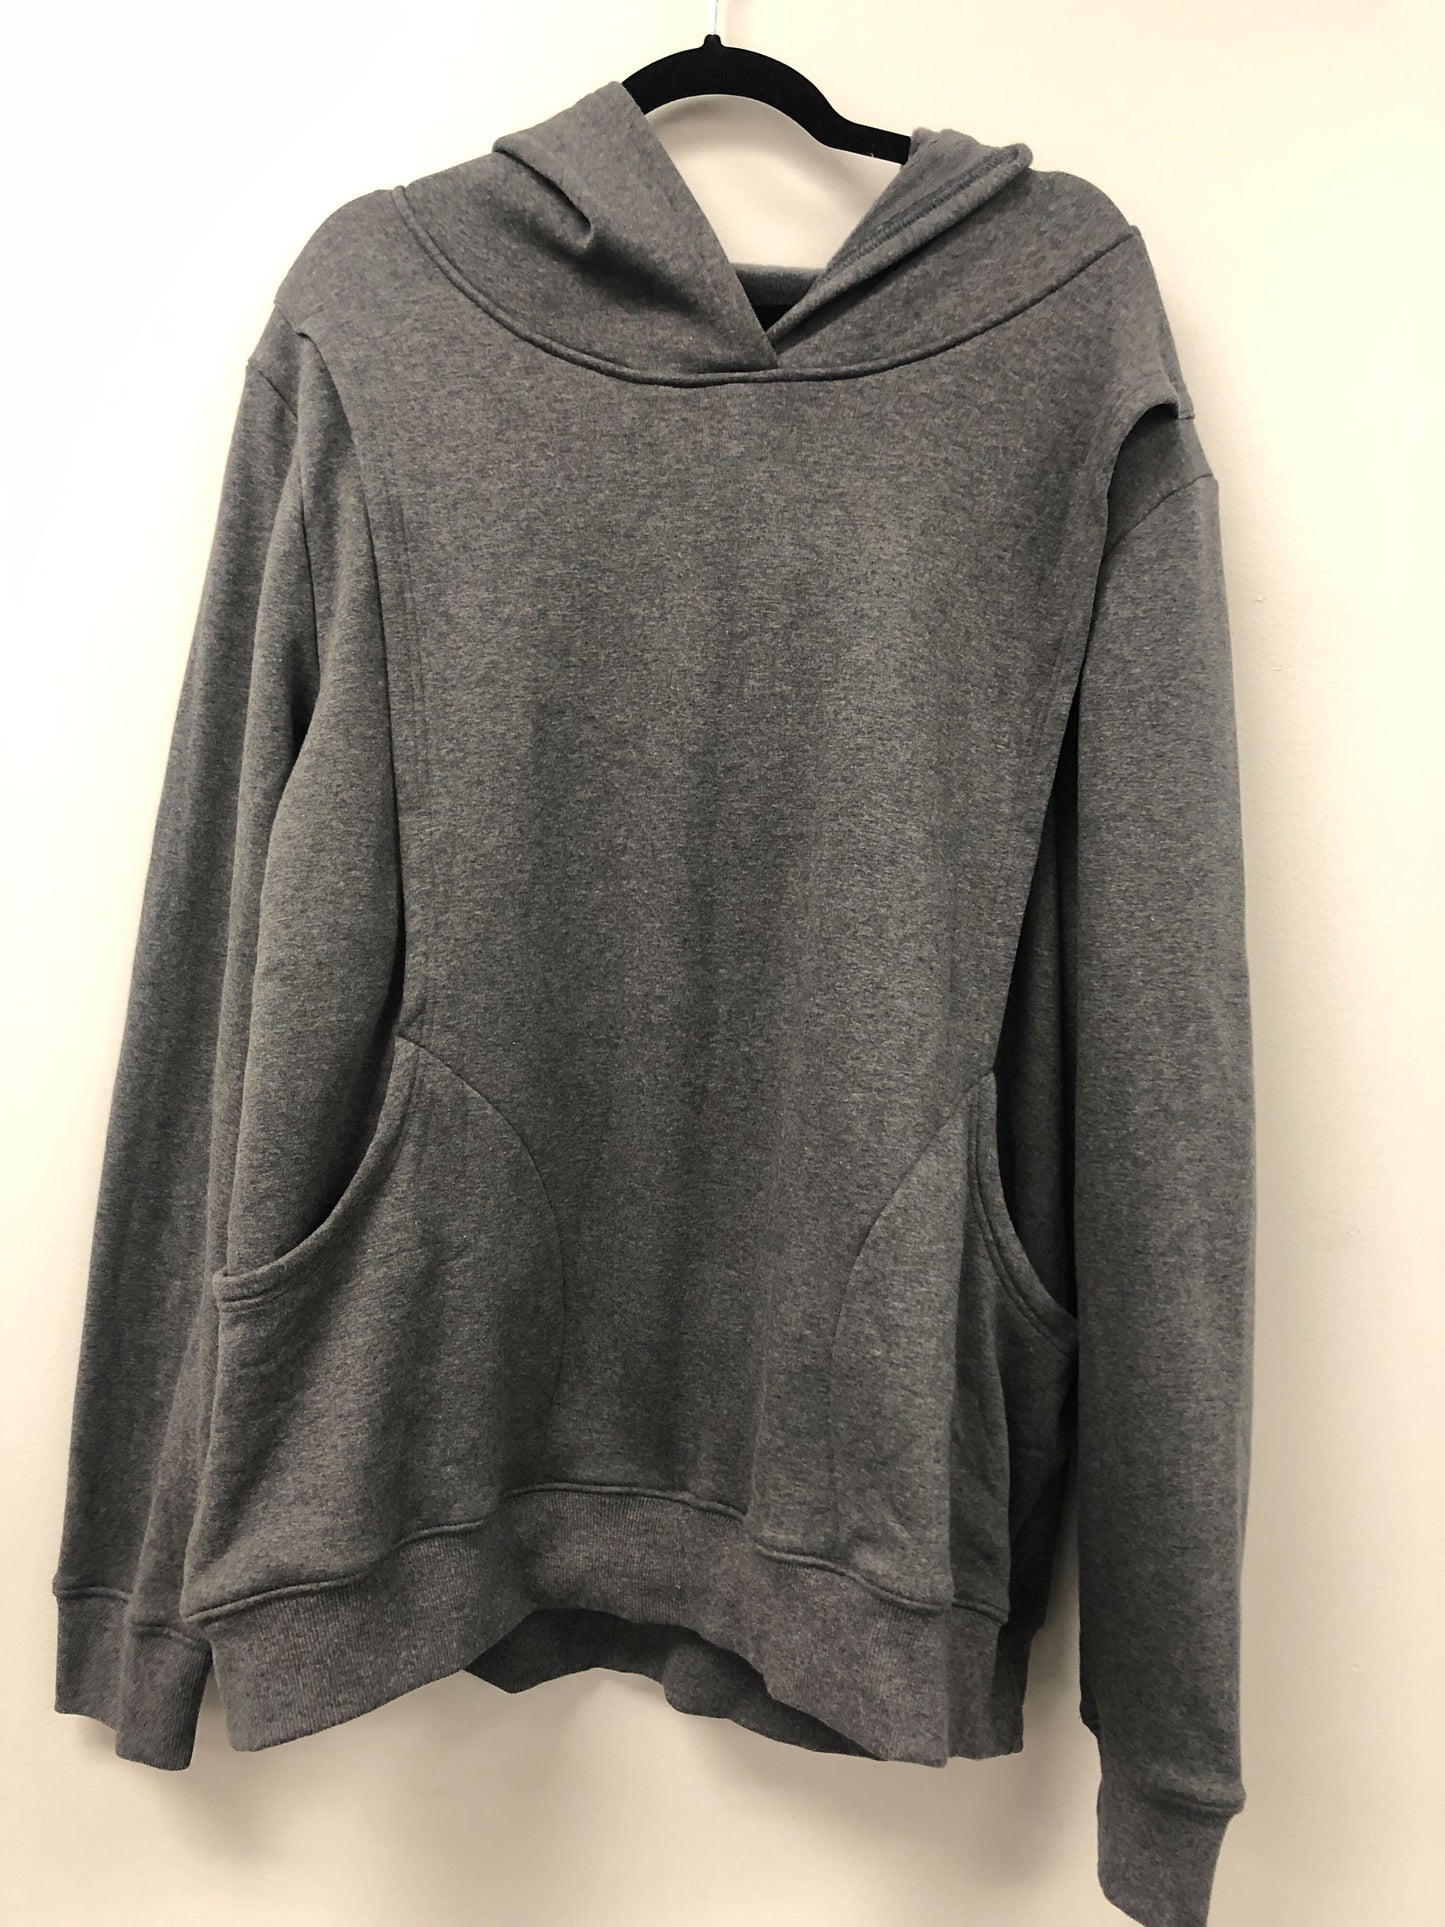 Outlet 5833 - The Latched Mama Heavy Hoodie - Charcoal - 3X